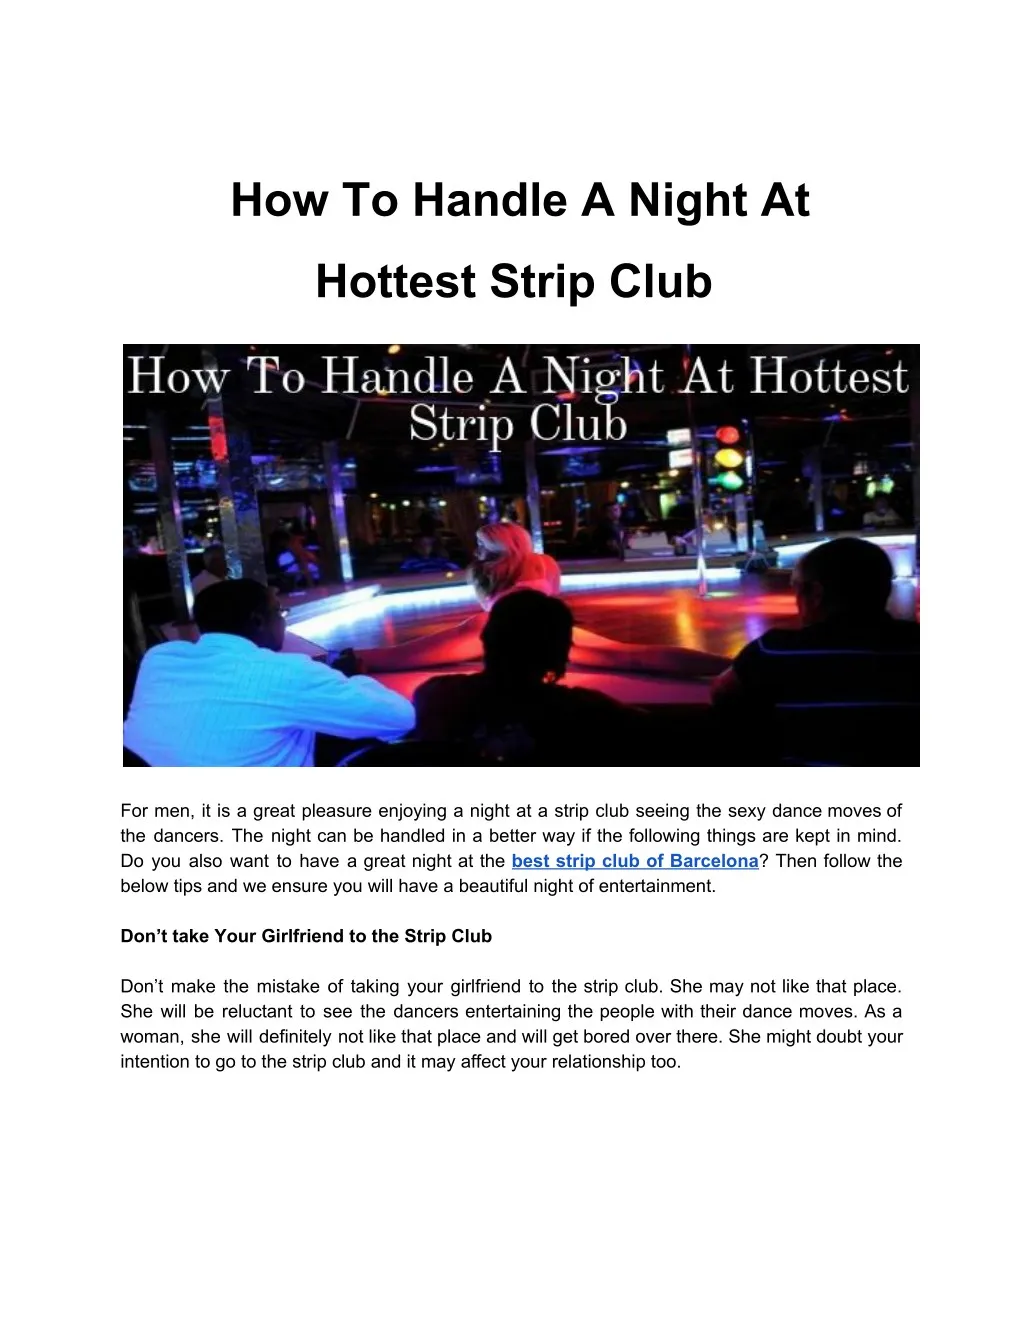 how to handle a night at